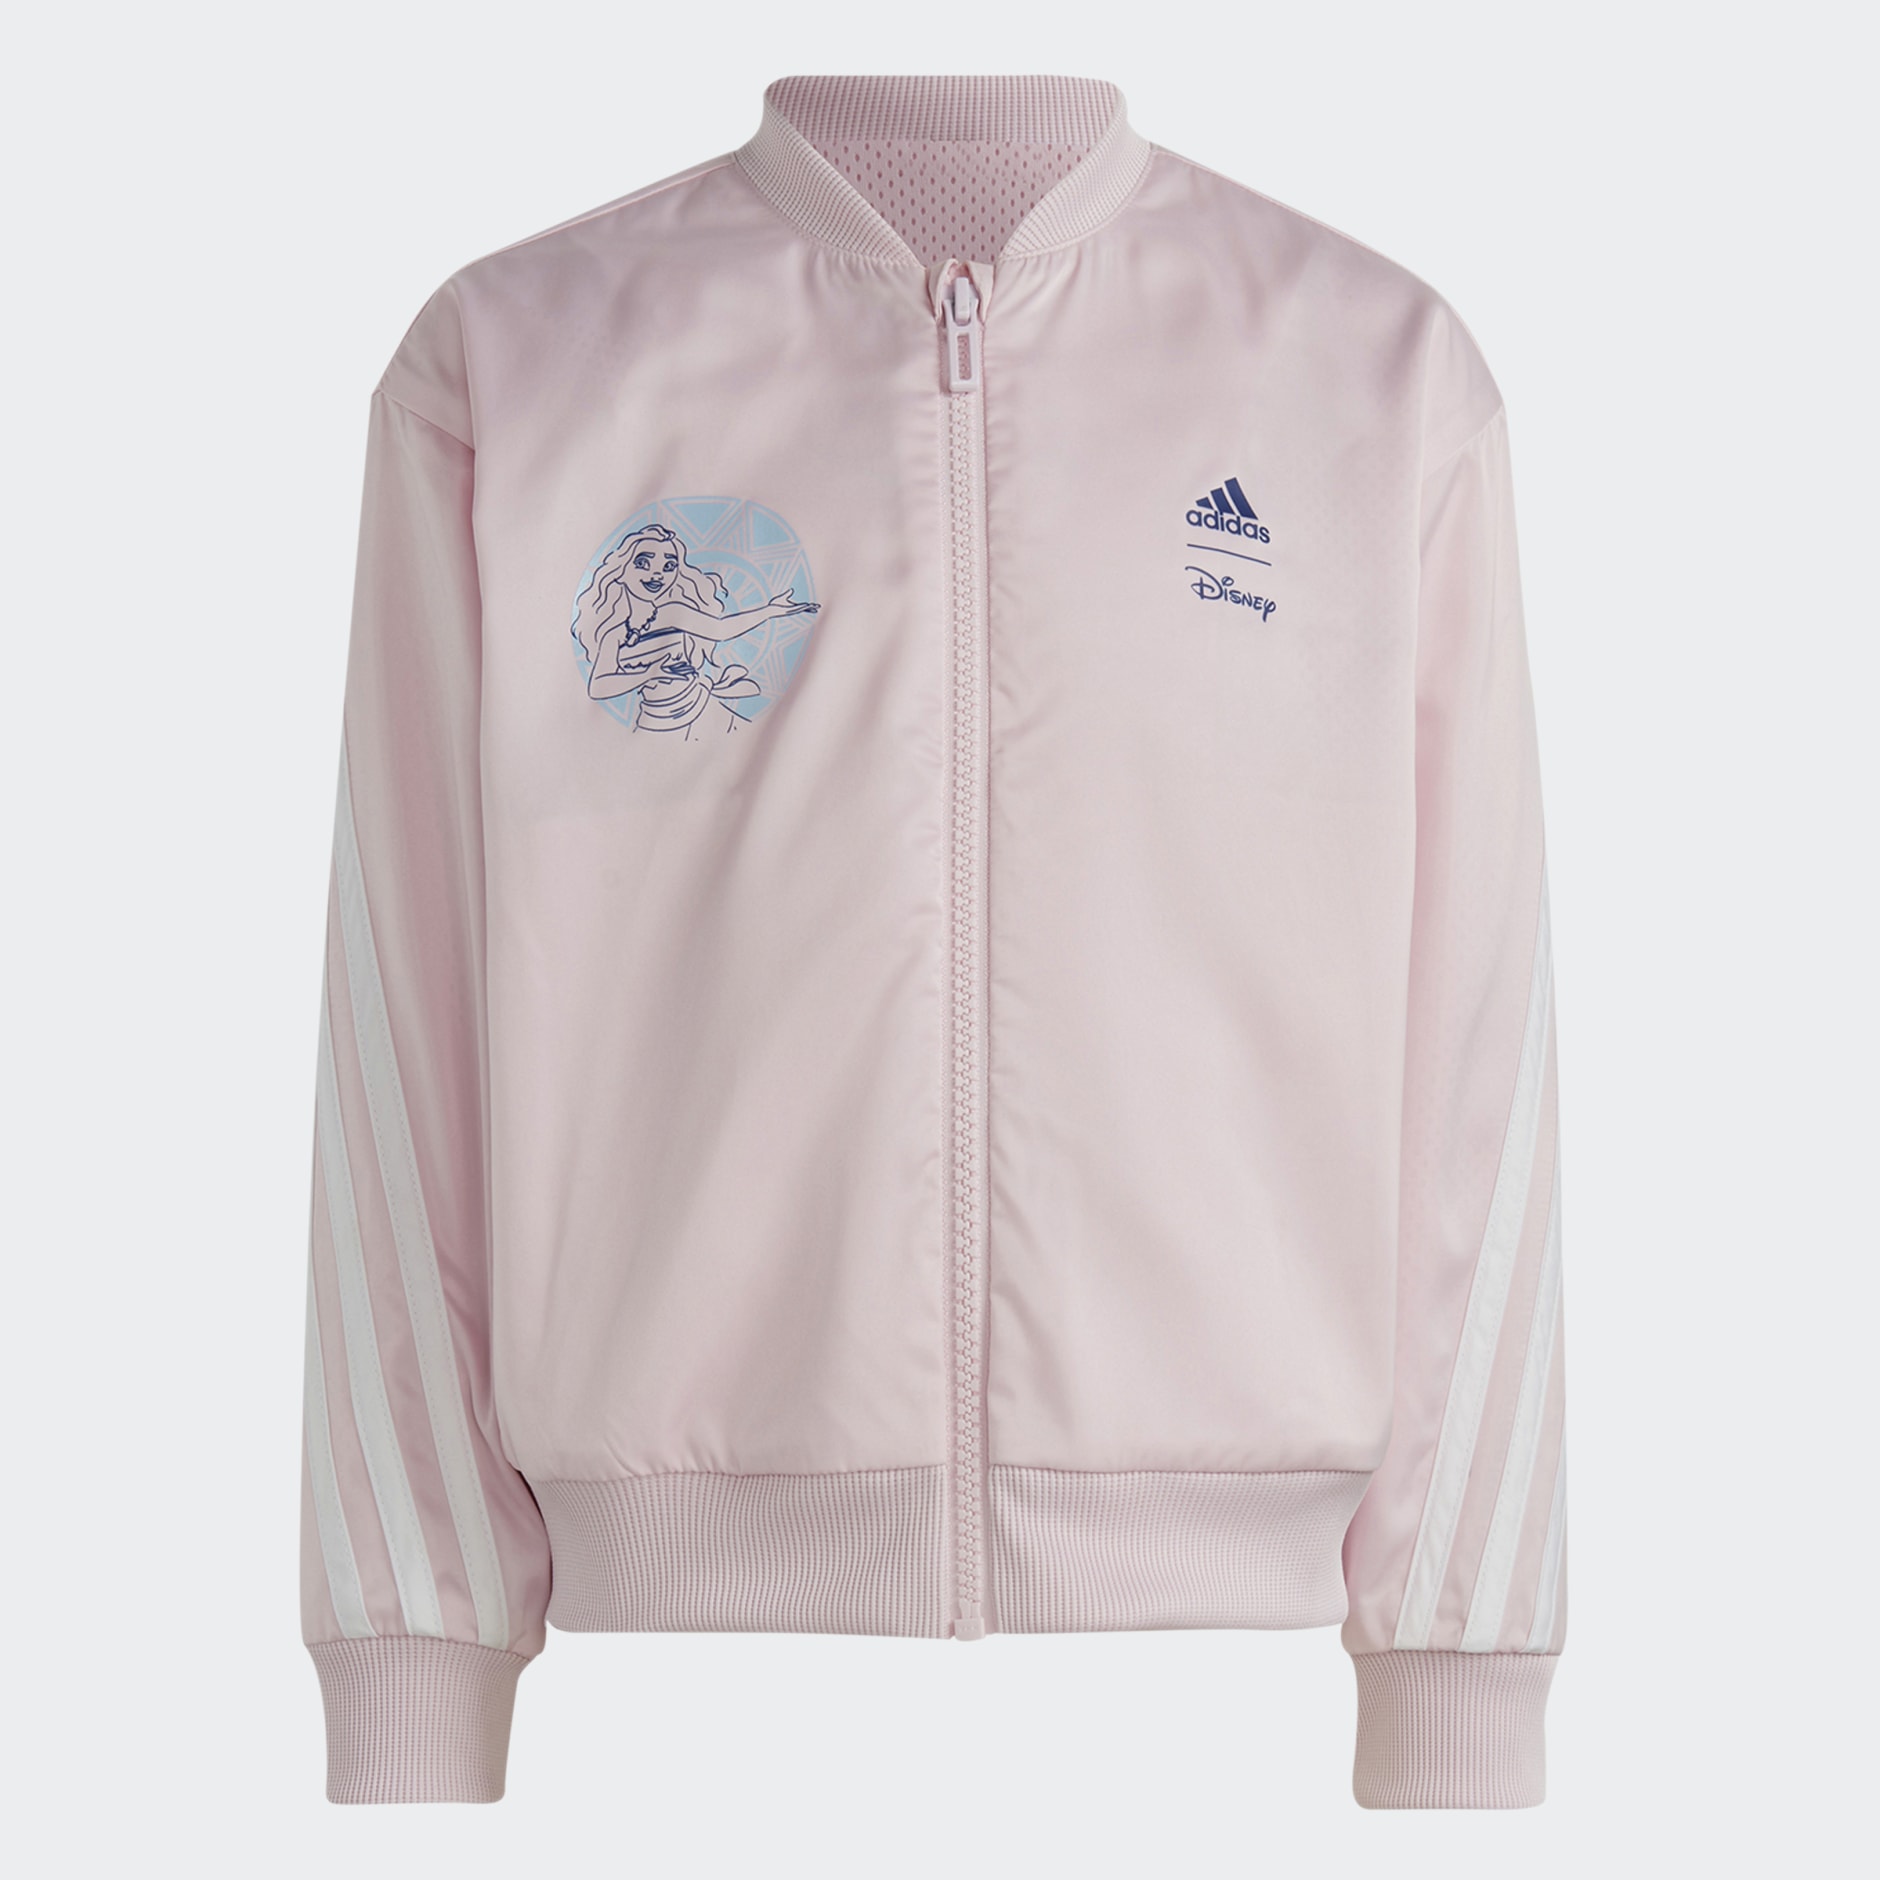 Clothing - Disney Moana Track Top - Pink | adidas South Africa